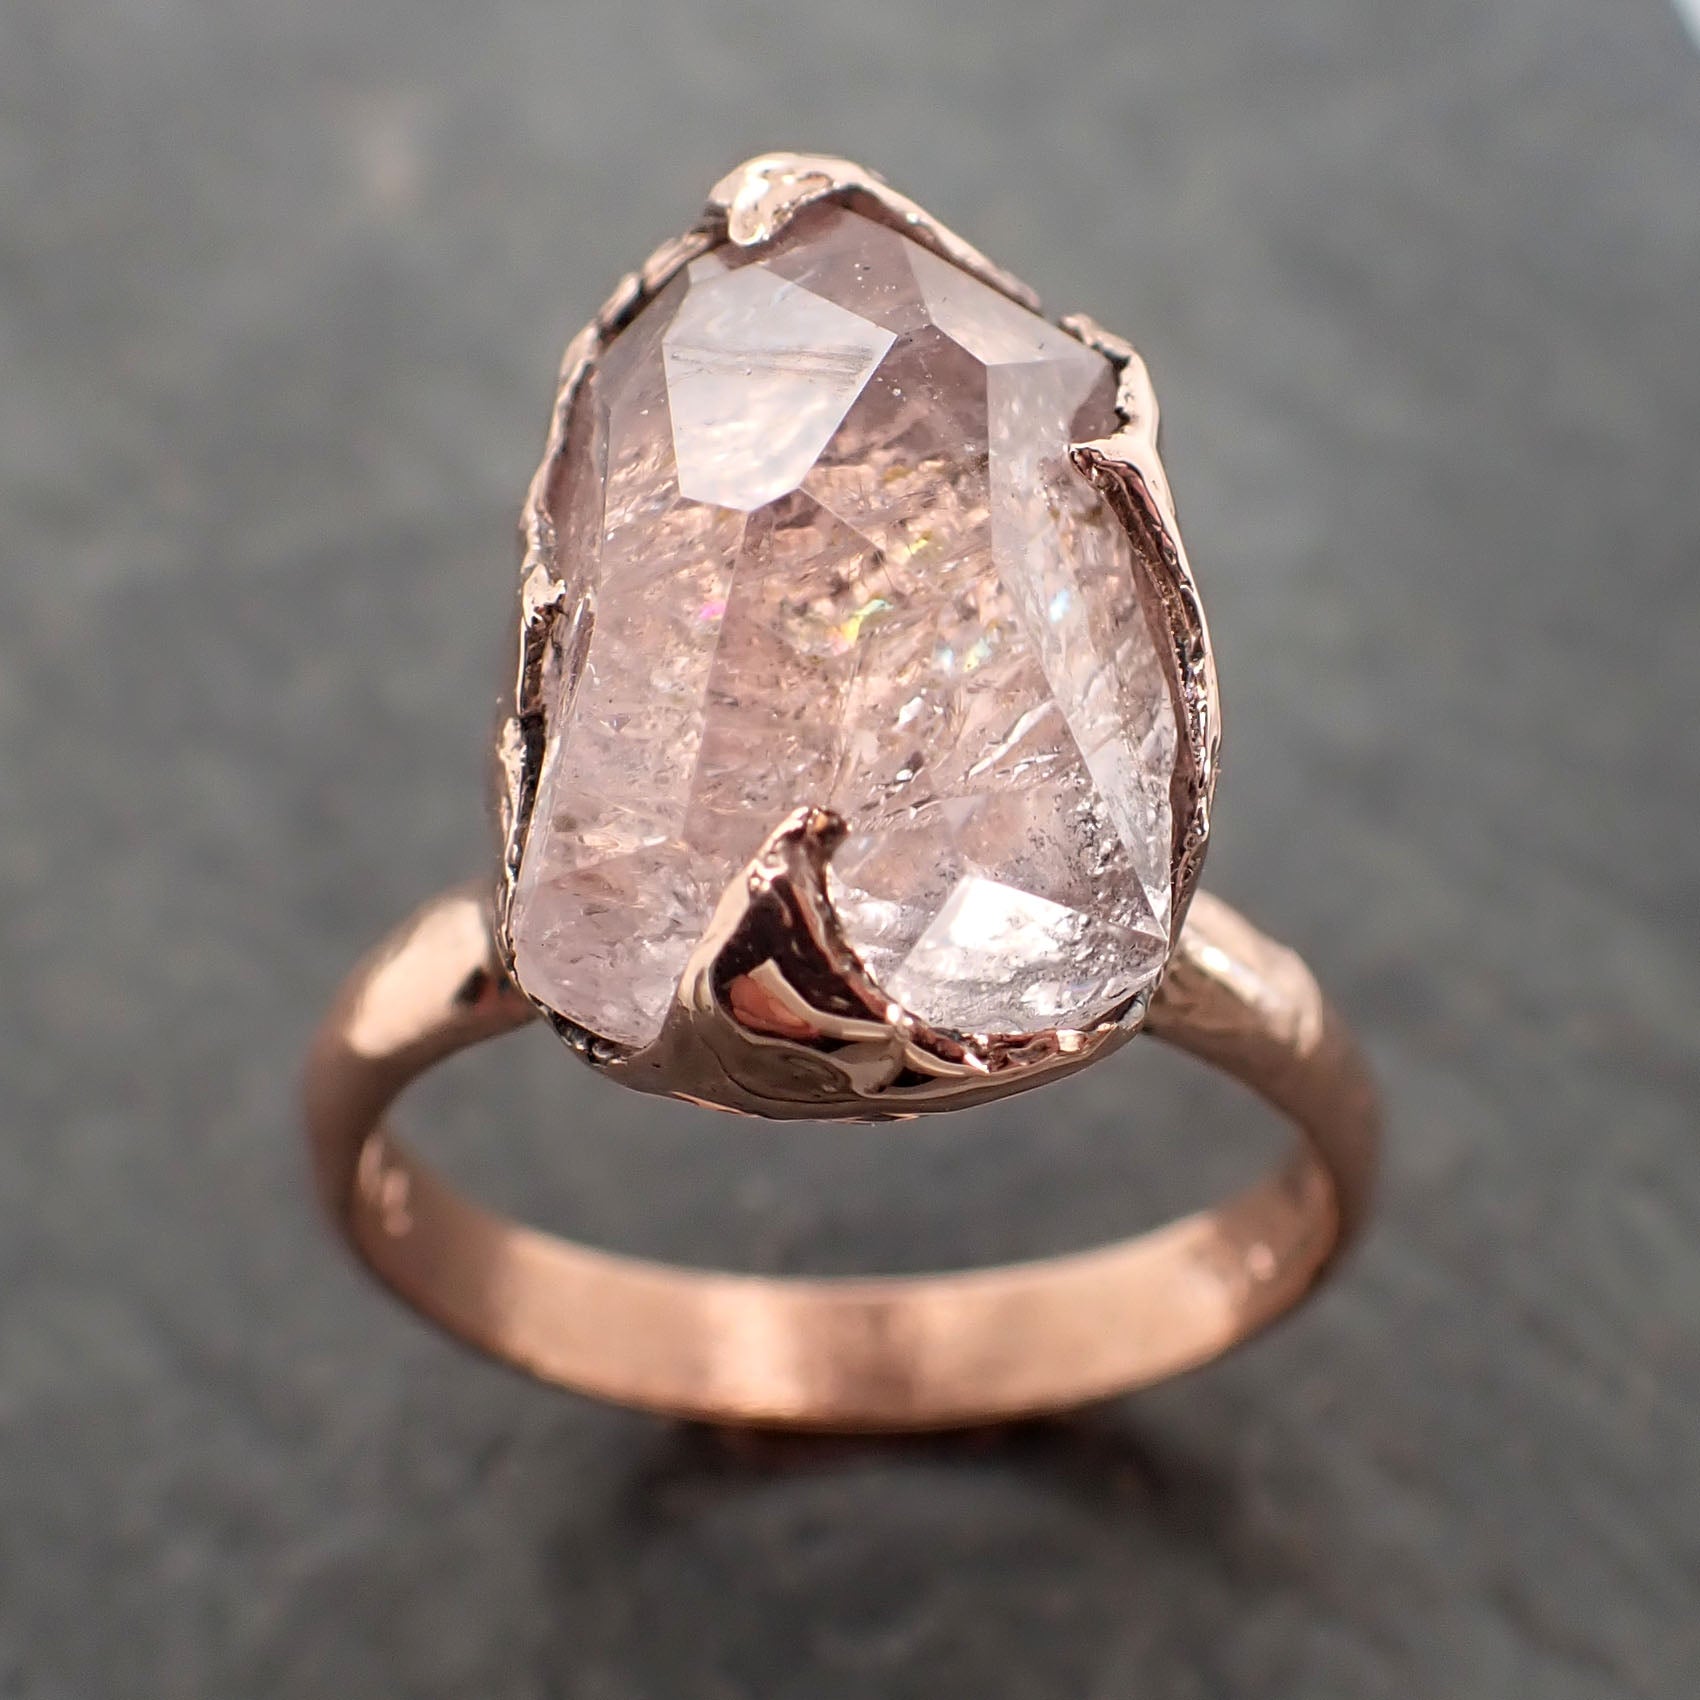 morganite partially faceted 14k rose gold solitaire pink gemstone ring statement ring gemstone jewelry by angeline 2392 Alternative Engagement